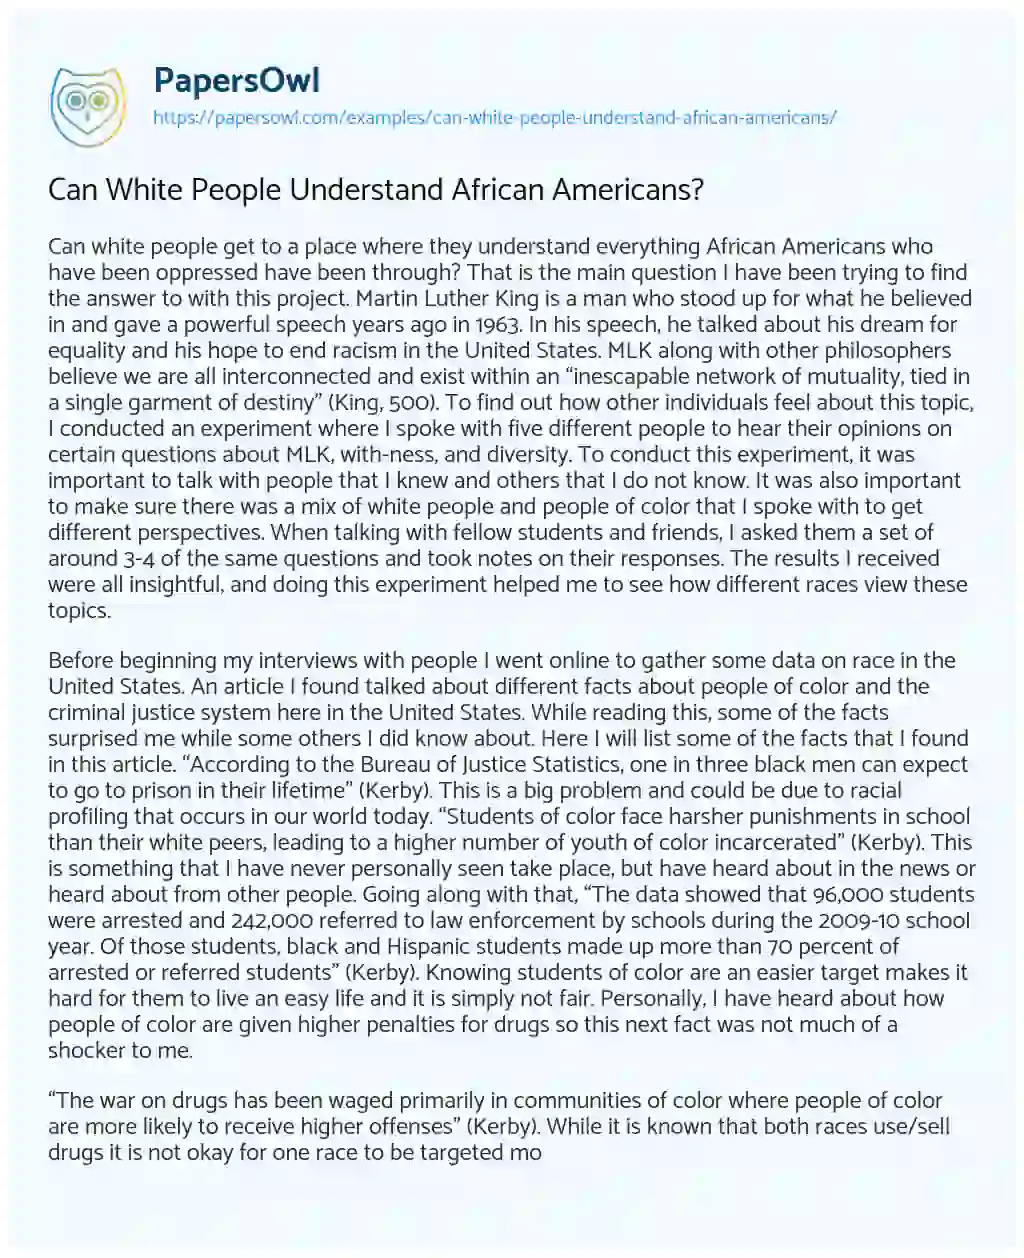 Essay on Can White People Understand African Americans?